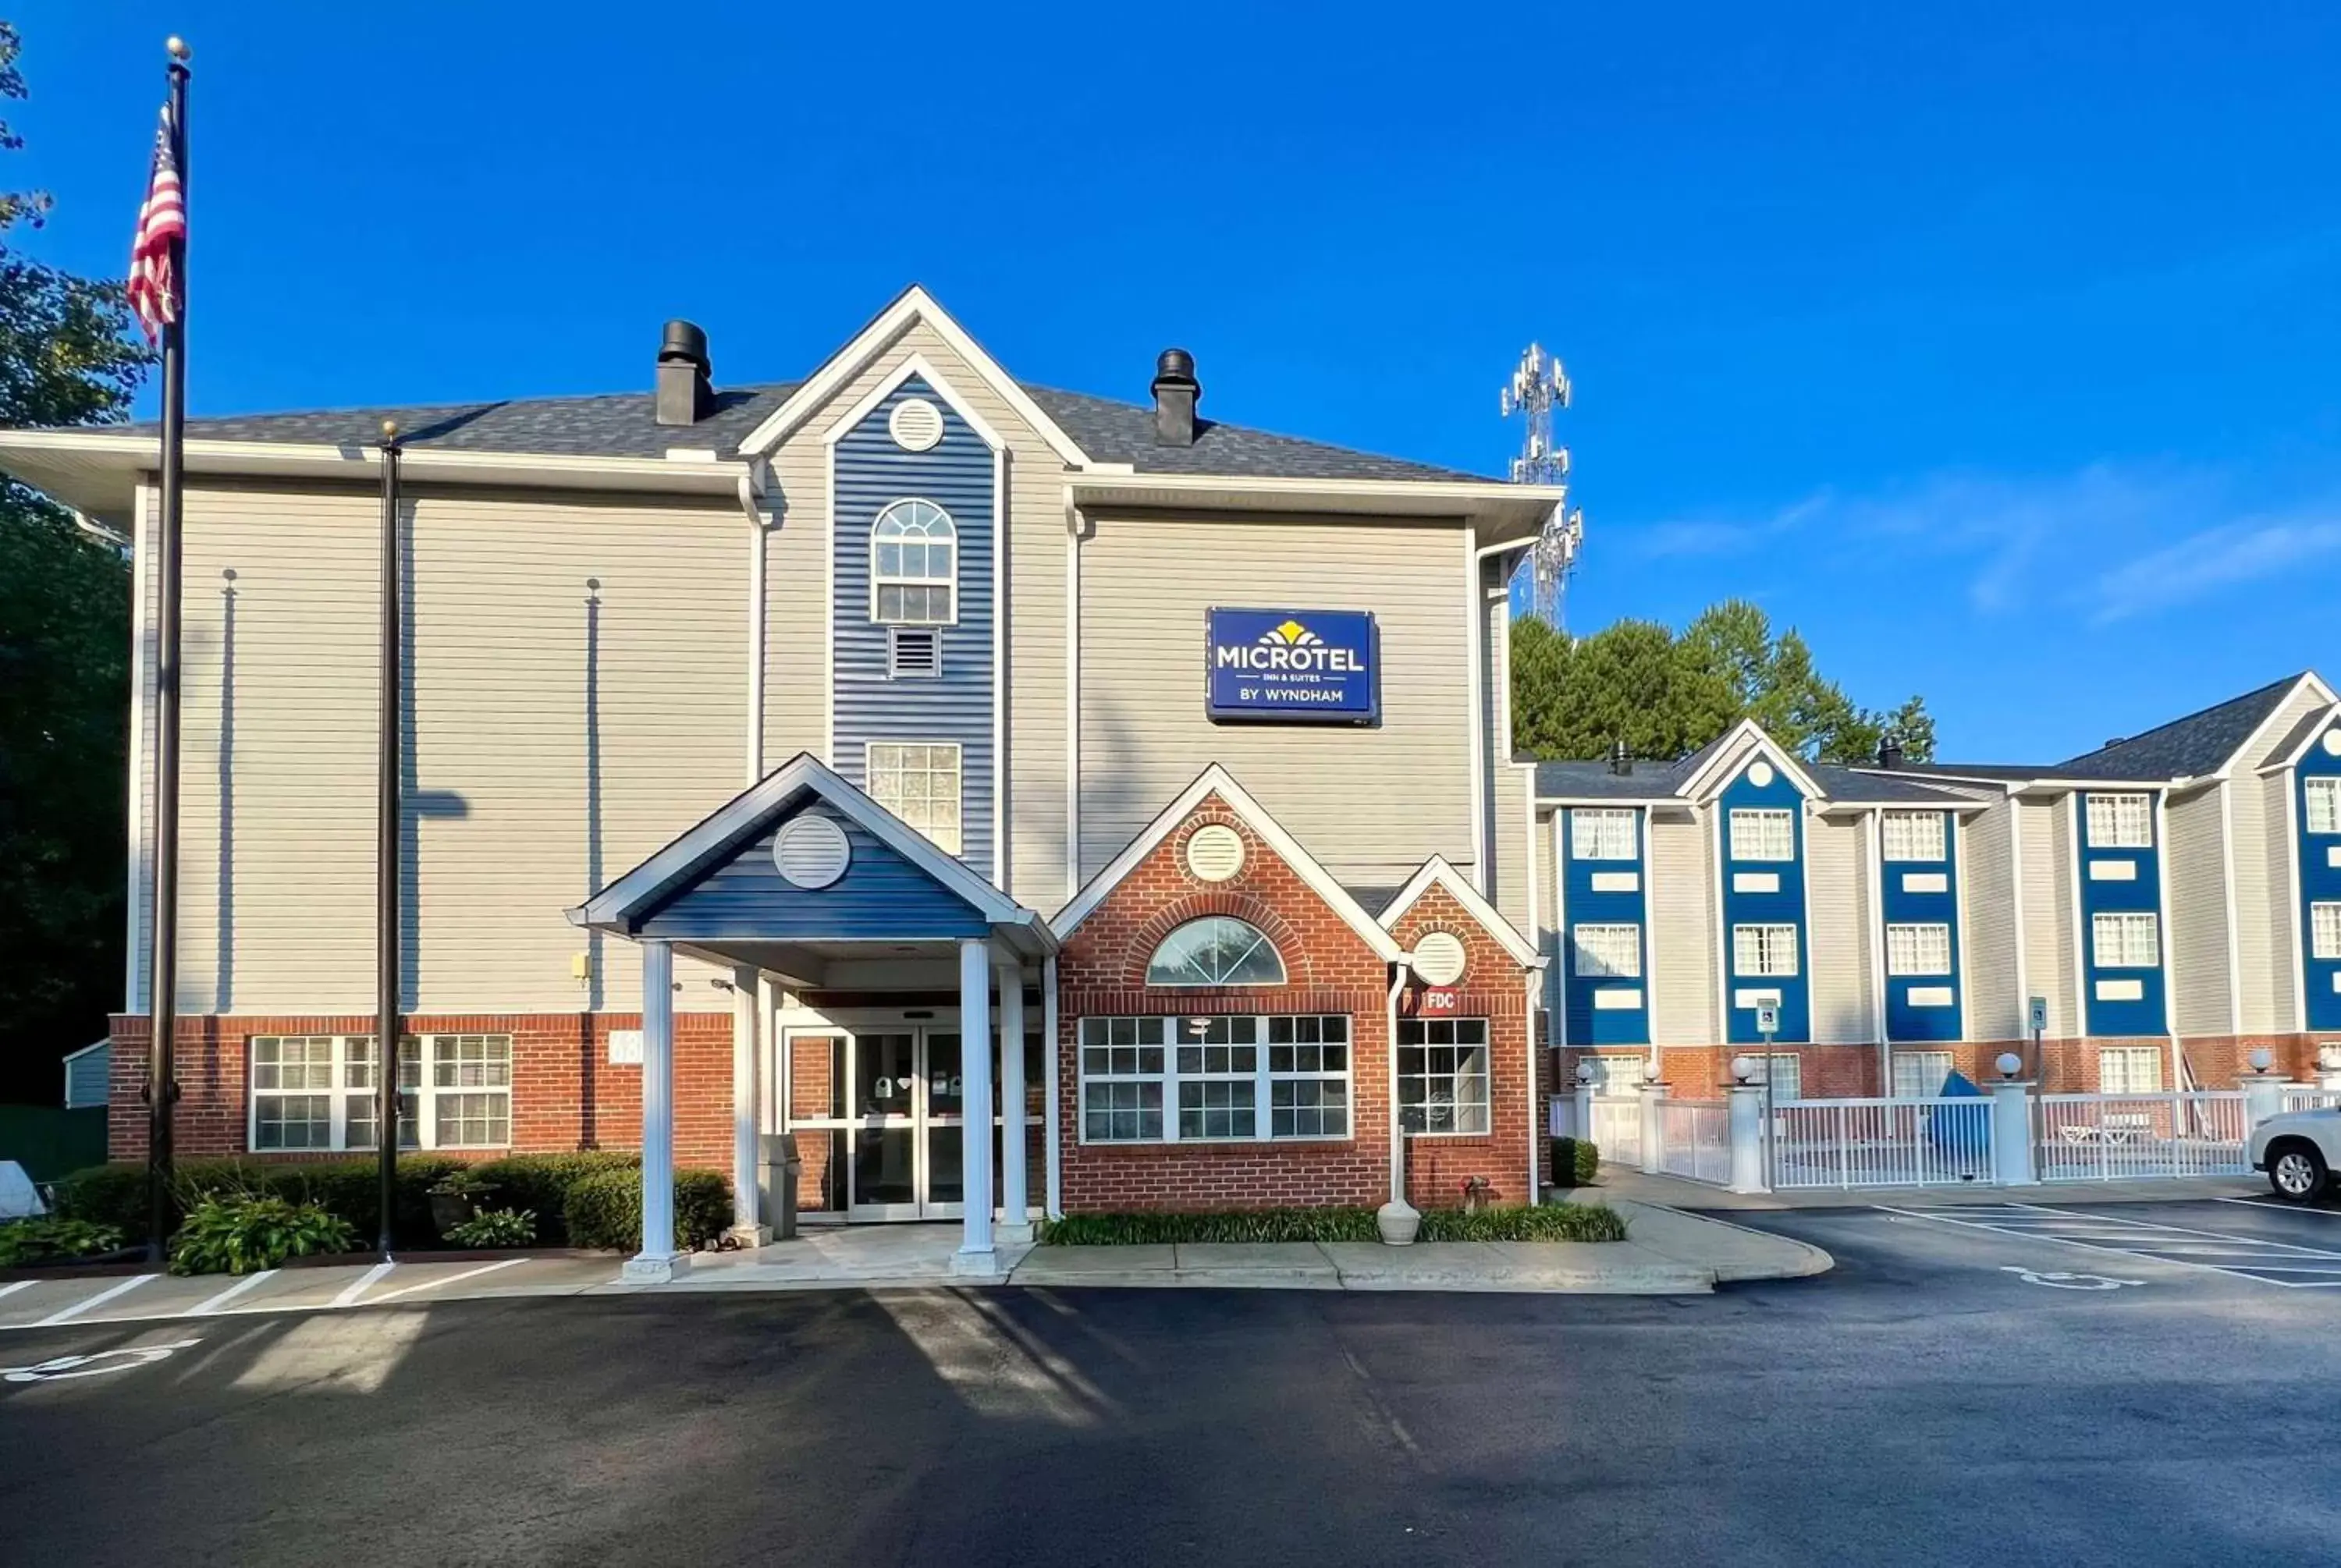 Property Building in Microtel Inn & Suites by Wyndham Charlotte/Northlake